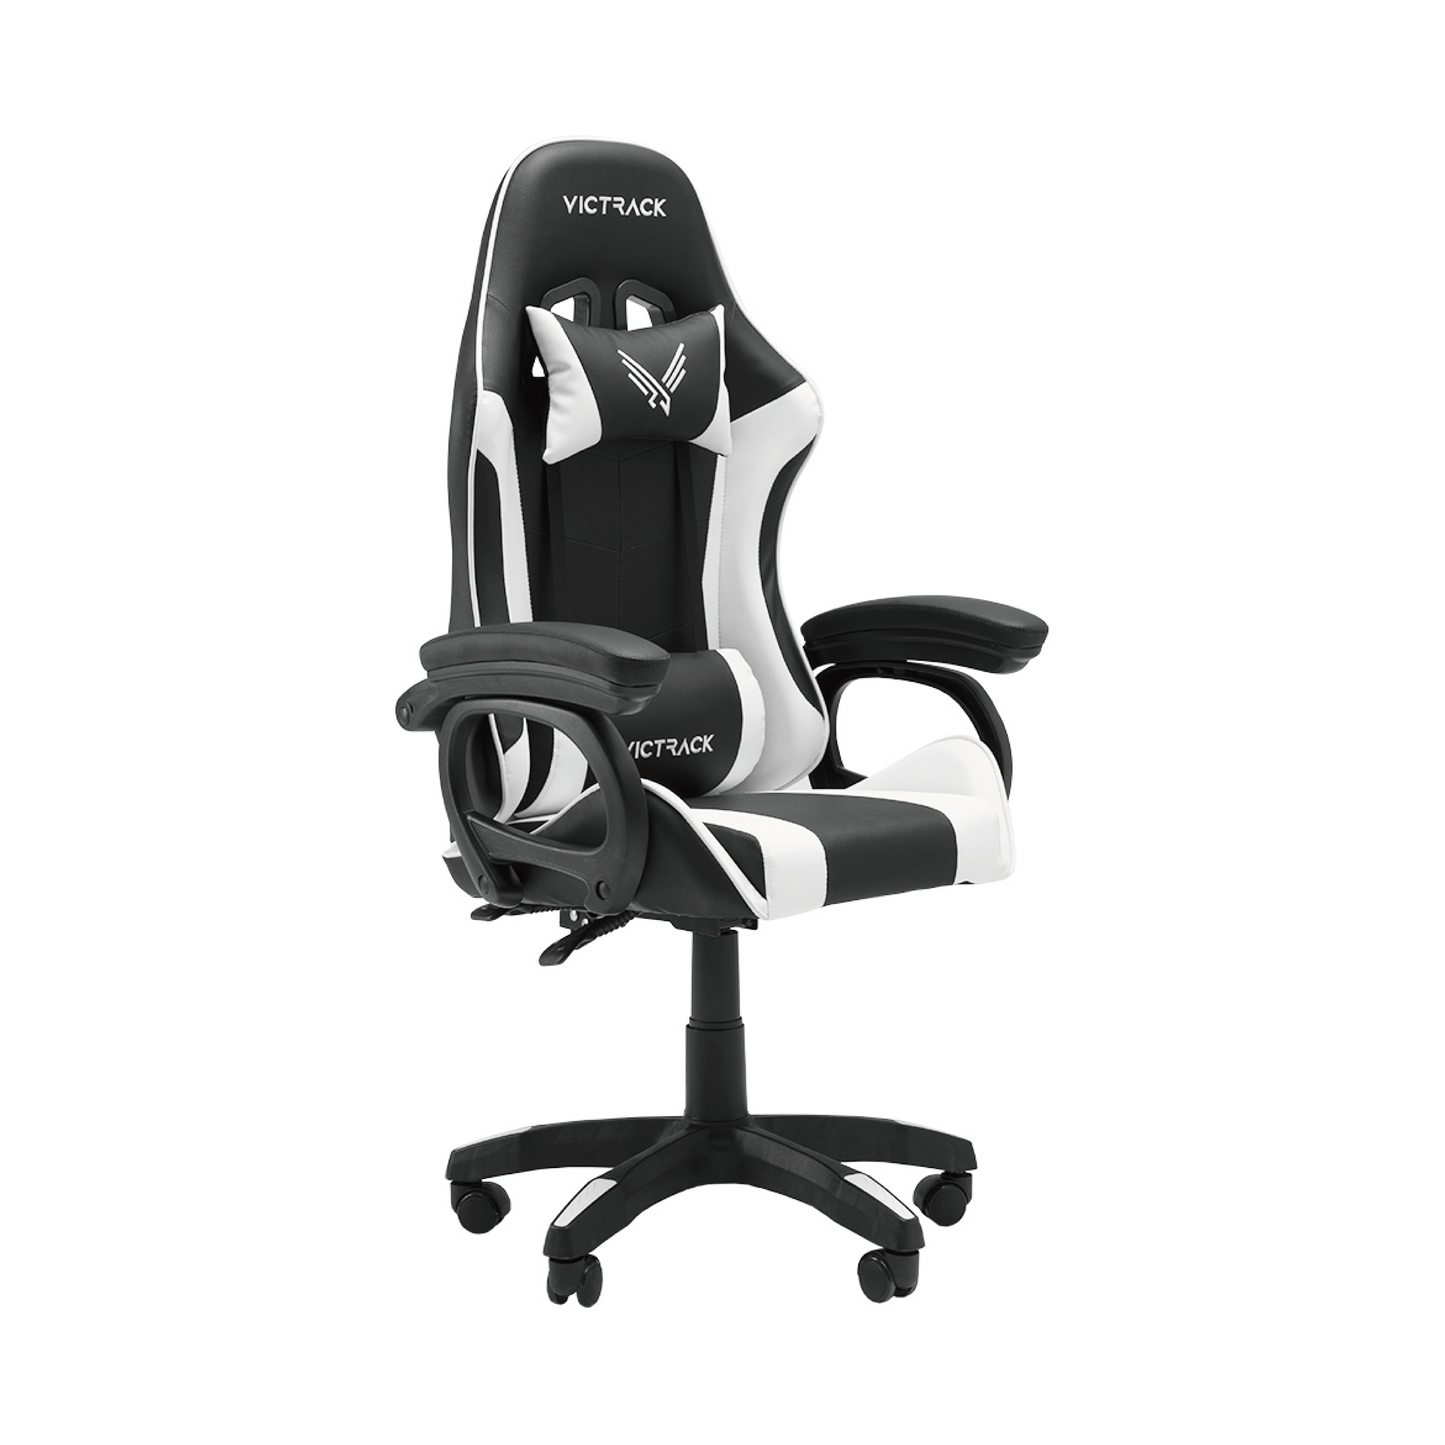 Victrack Basic Gaming Chair, Computer Chair, Height Adjustable, with 360°-Swivel Seat and Headrest and for Office or Gaming, A-01, White and Black